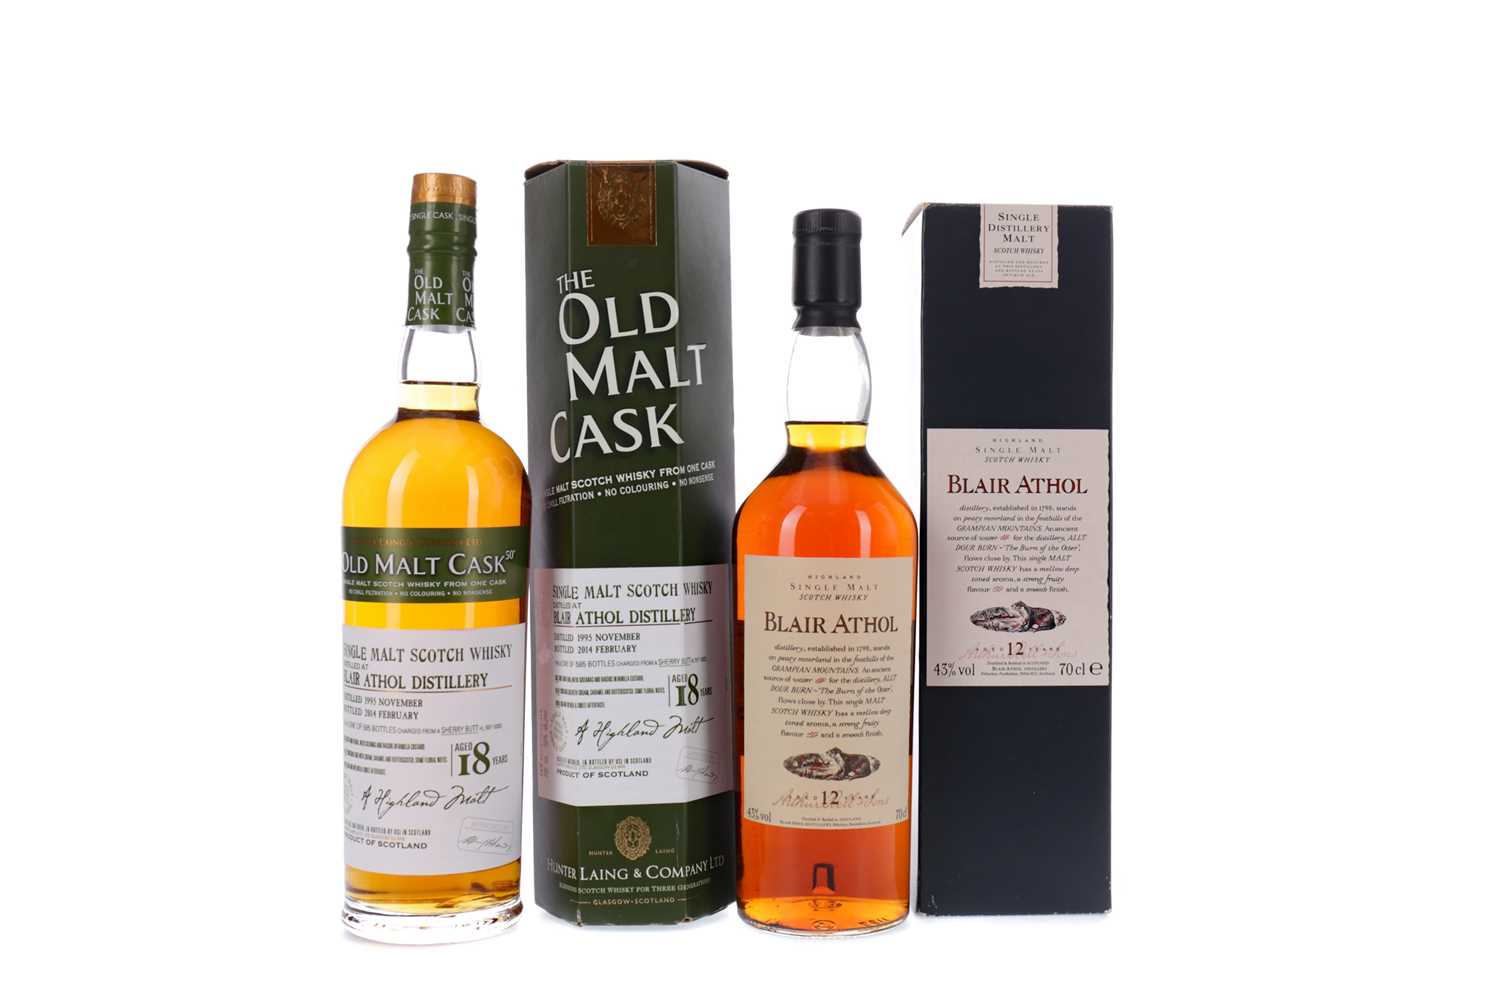 Lot 108 - BLAIR ATHOL 1995 OLD MALT CASK AGED 18 YEARS AND BLAIR ATHOL AGED 12 YEARS FLORA & FAUNA